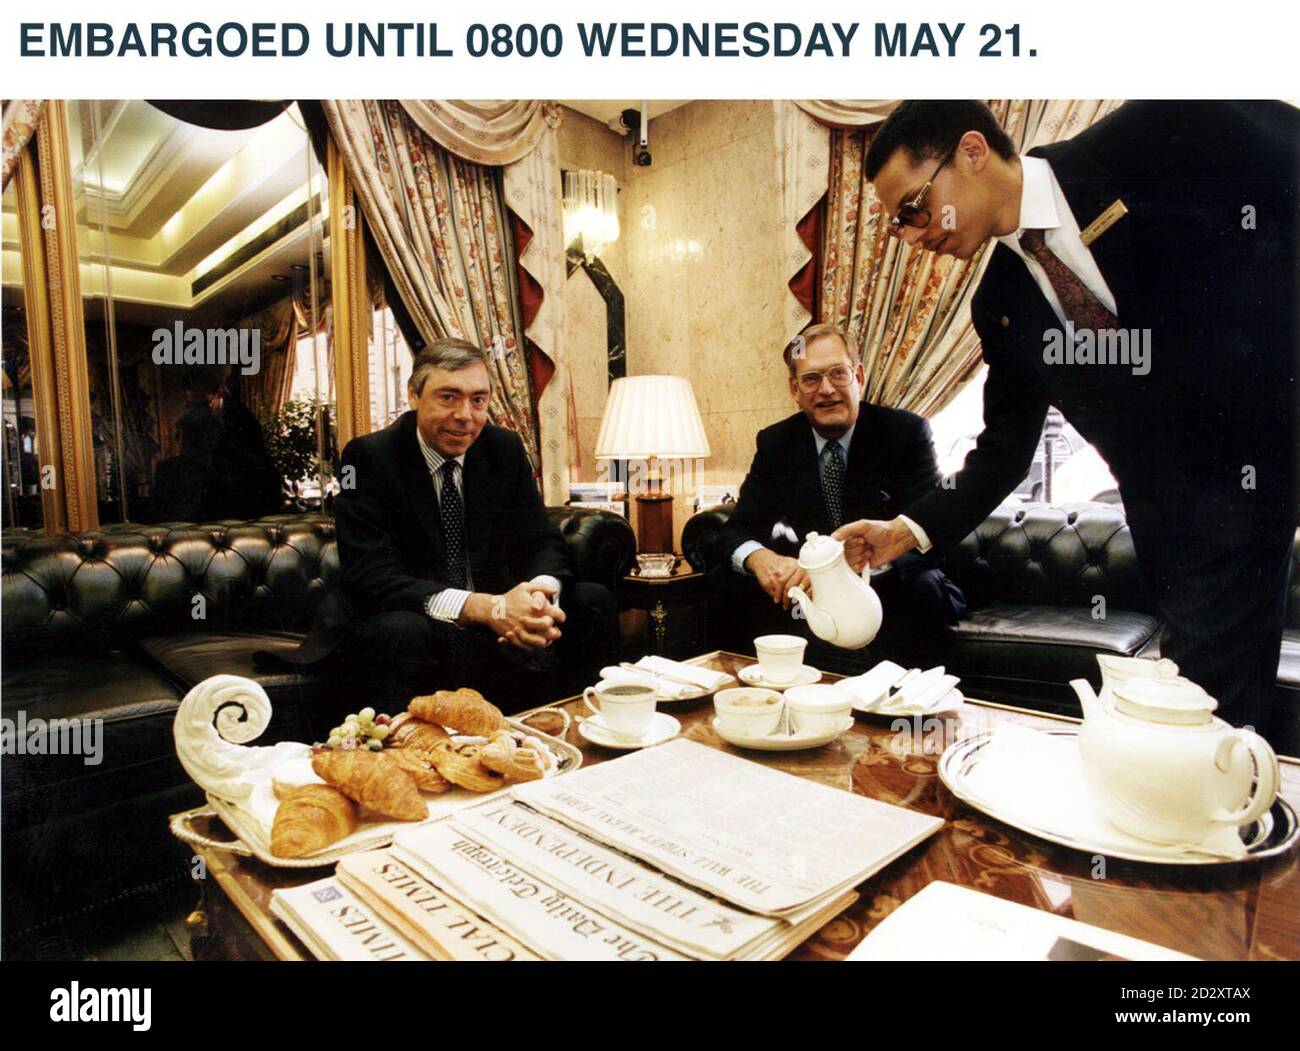 ** EMBARGOED UNTIL 0800 MAY 21** From left to right:  Richard North, Finance Director of Bass PLC, Sir Ian Prosser, Chairman of Bass PLC and hotel waiter. The company announces their interim results on Wednesday 21 May 1997. PA Photo. Stock Photo